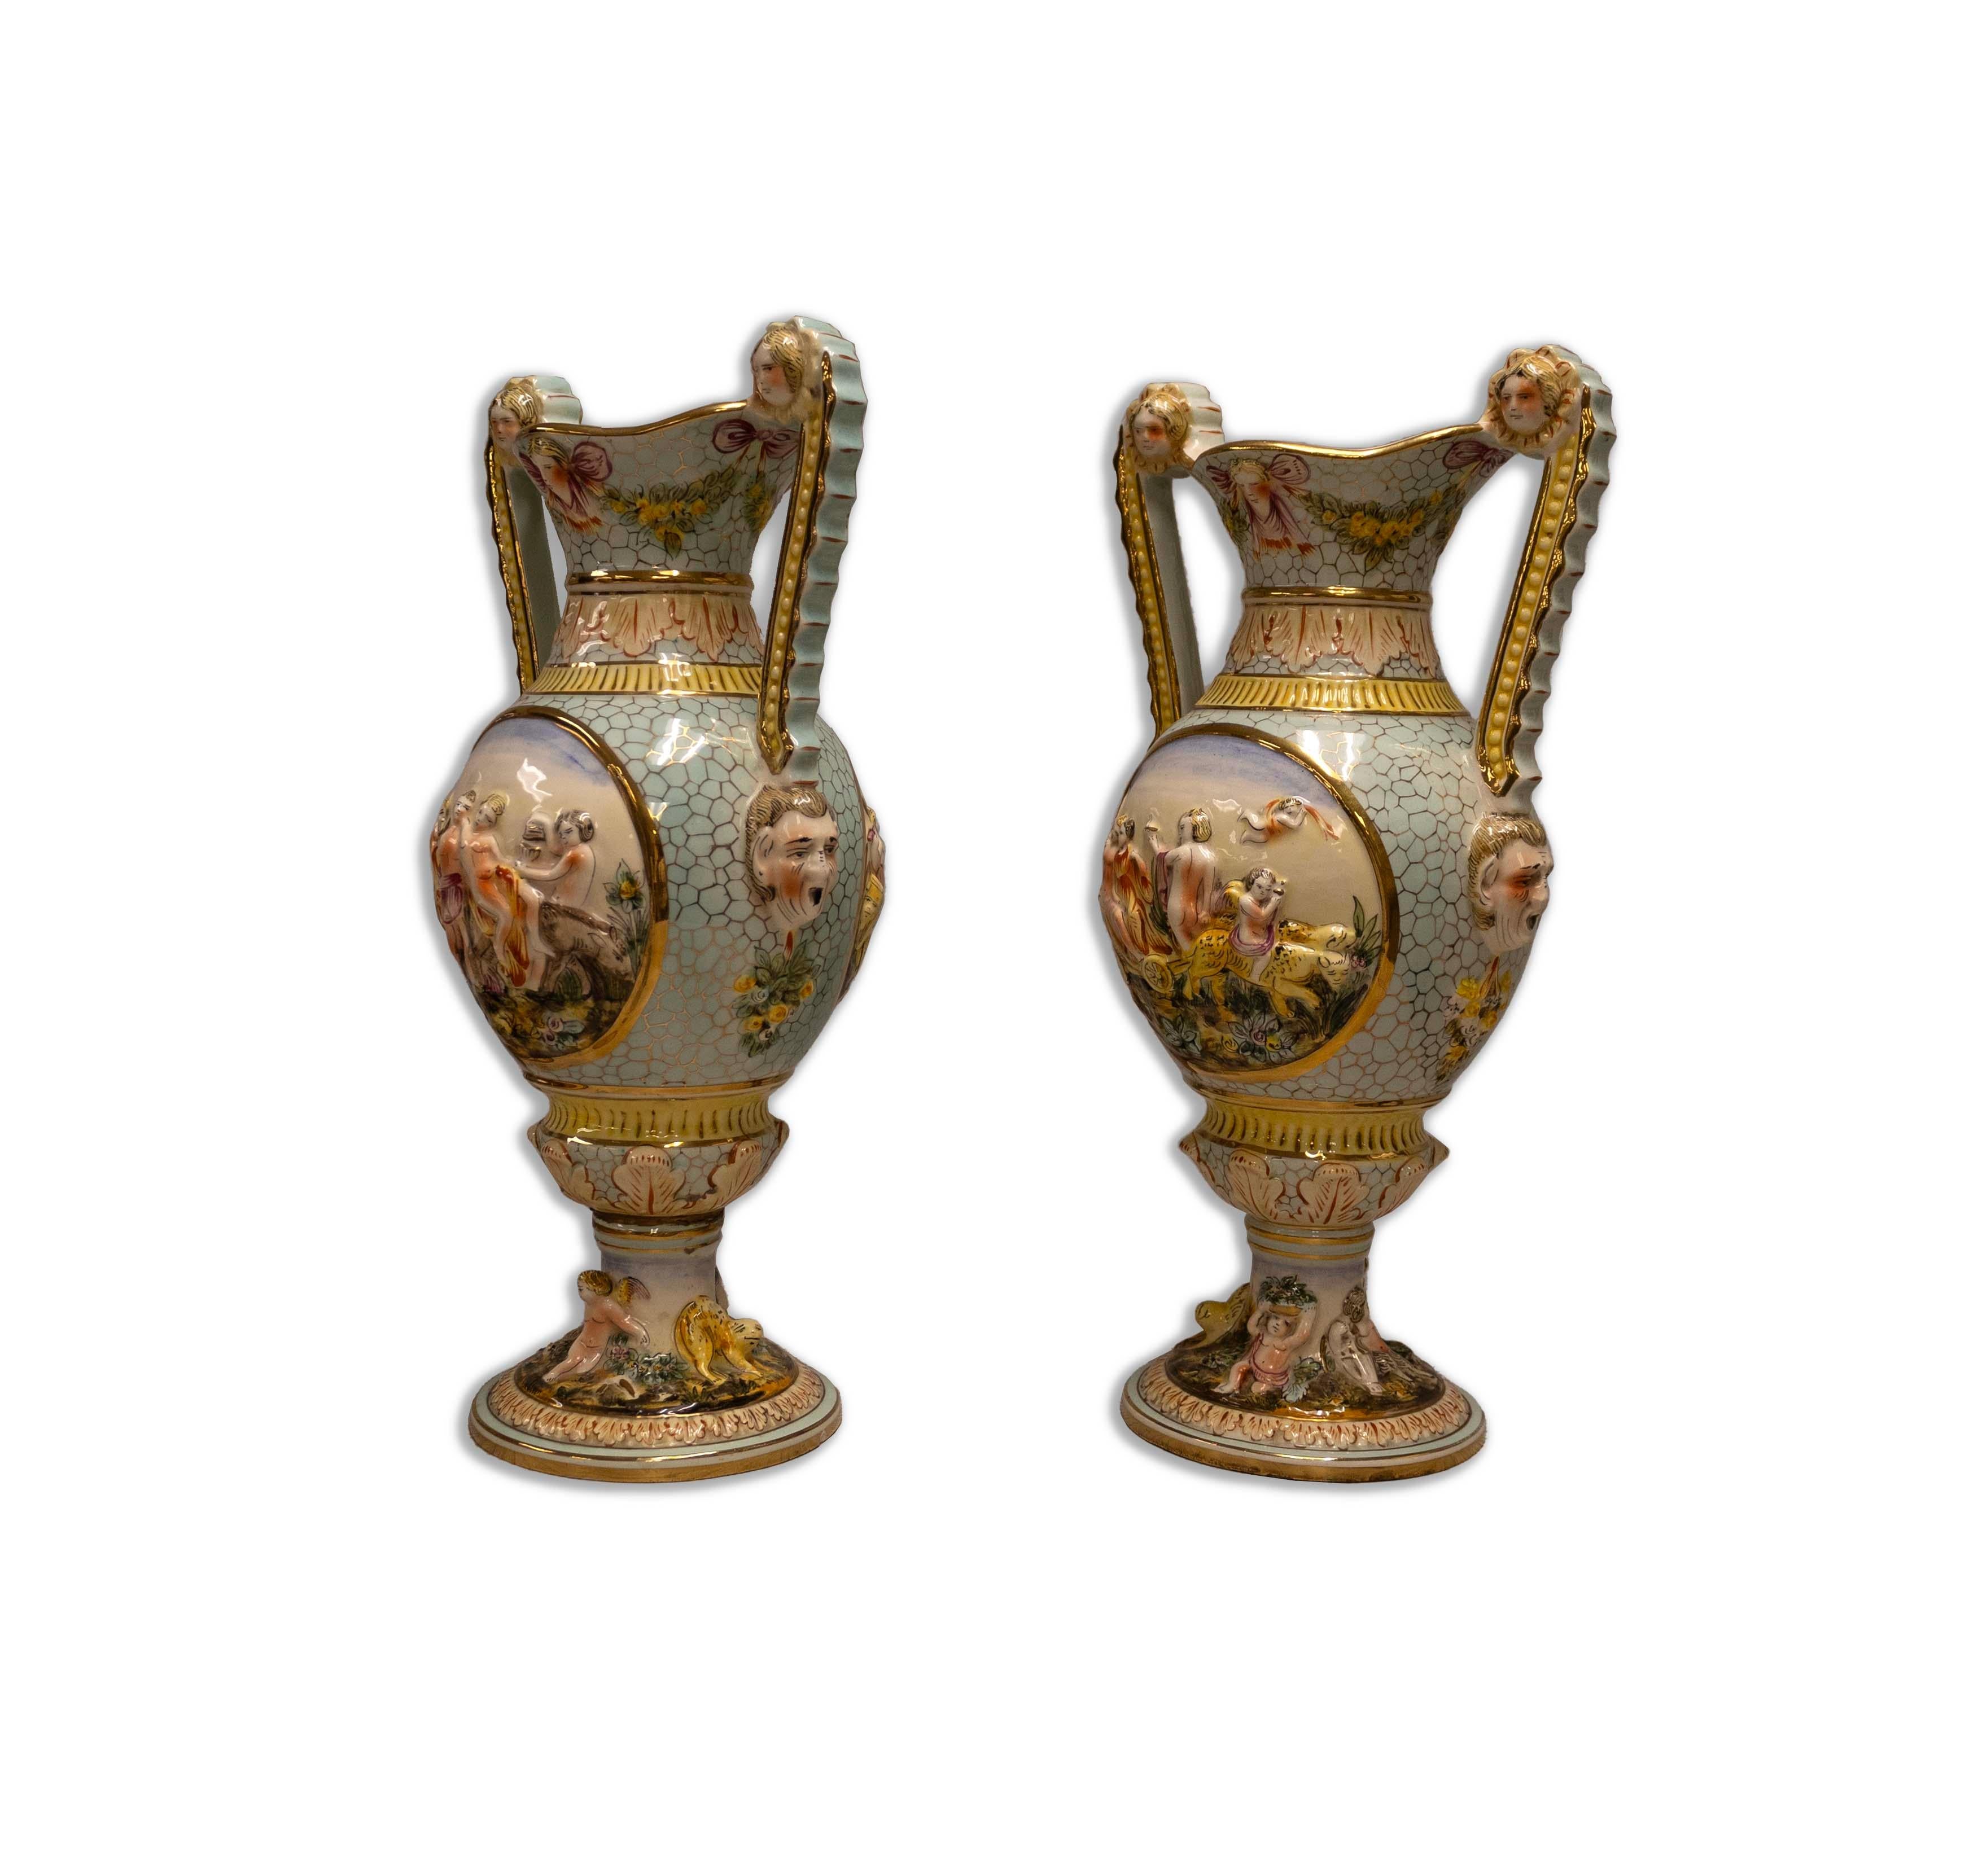 Immerse yourself in the opulence and artistry of these majestic ornate sculptural vessels designed by Capodimonte. Stamped on bottom 